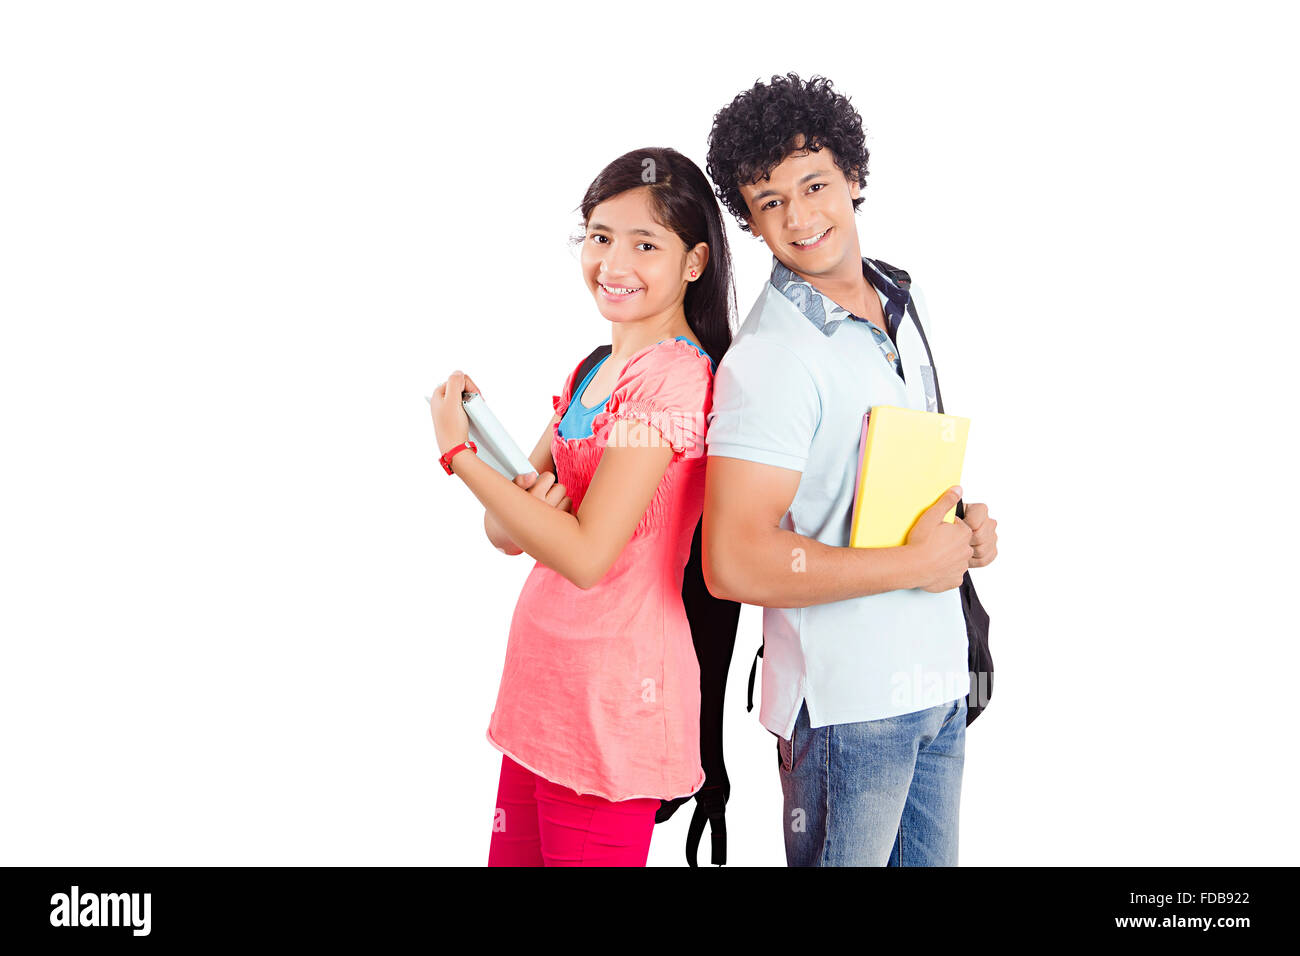 2 Teenagers Student College friends Back to back Standing Stock Photo